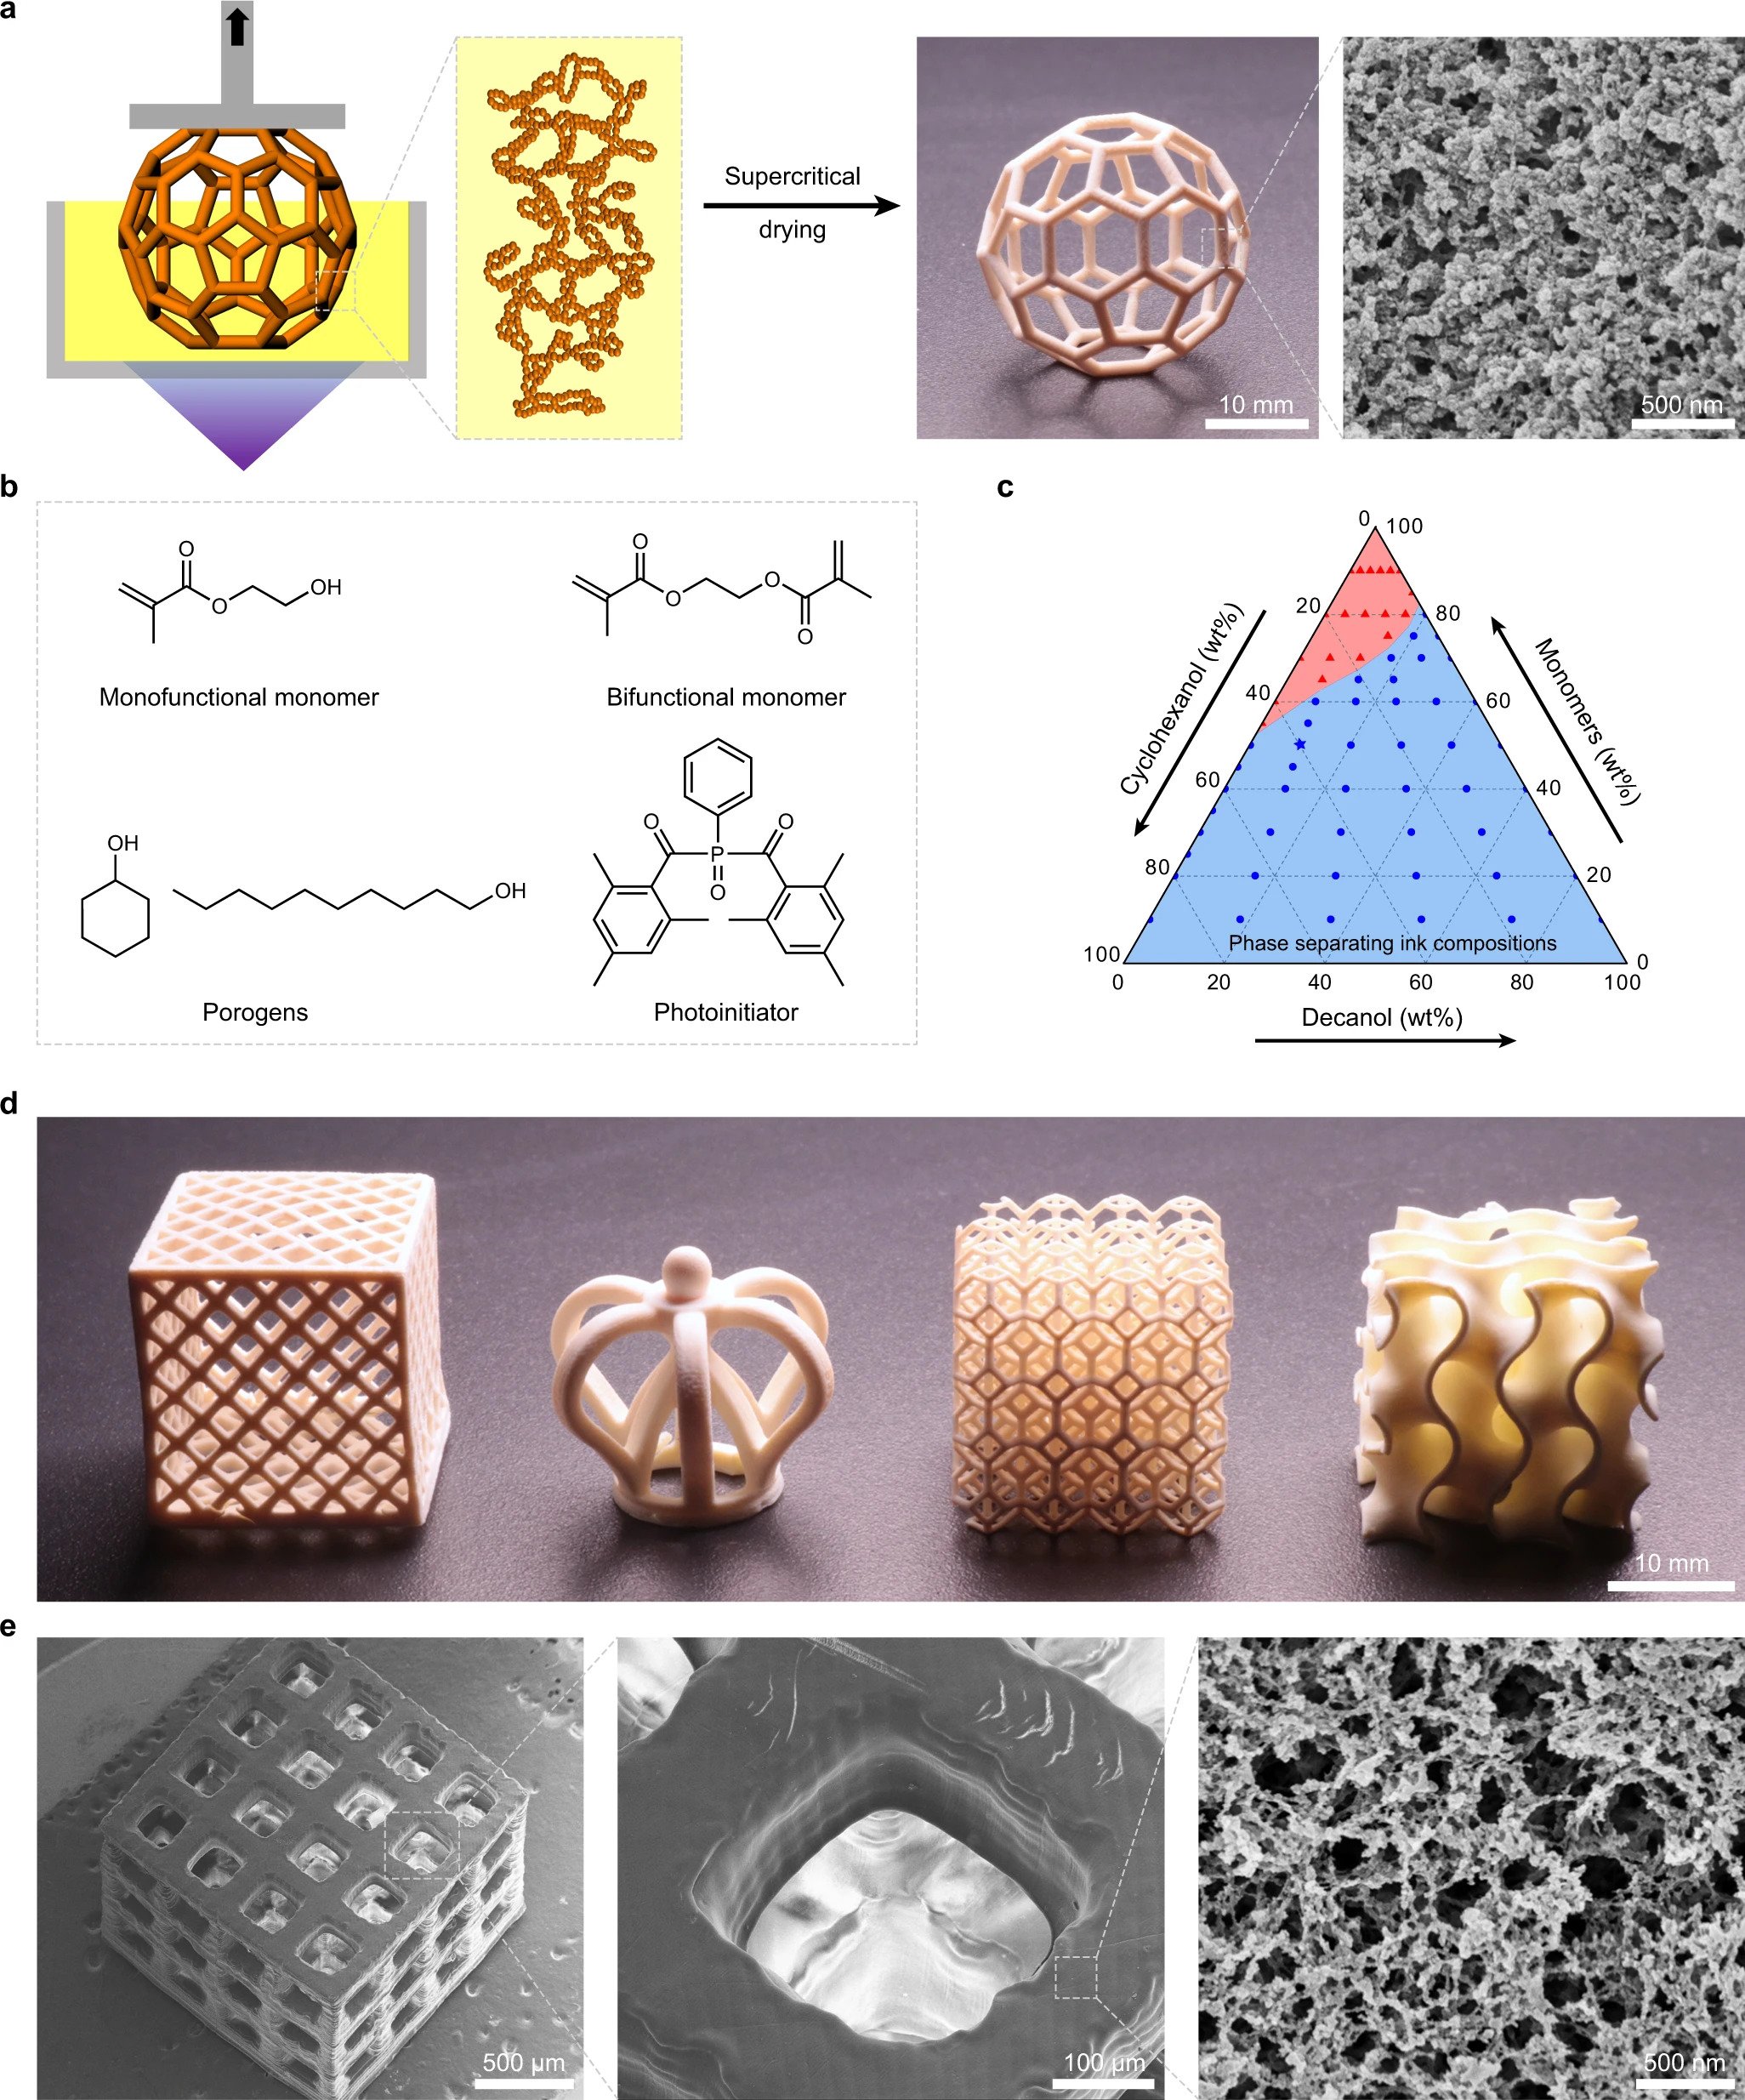 KIT 3D print polymer objects with flexibility and porosity - 3D Printing